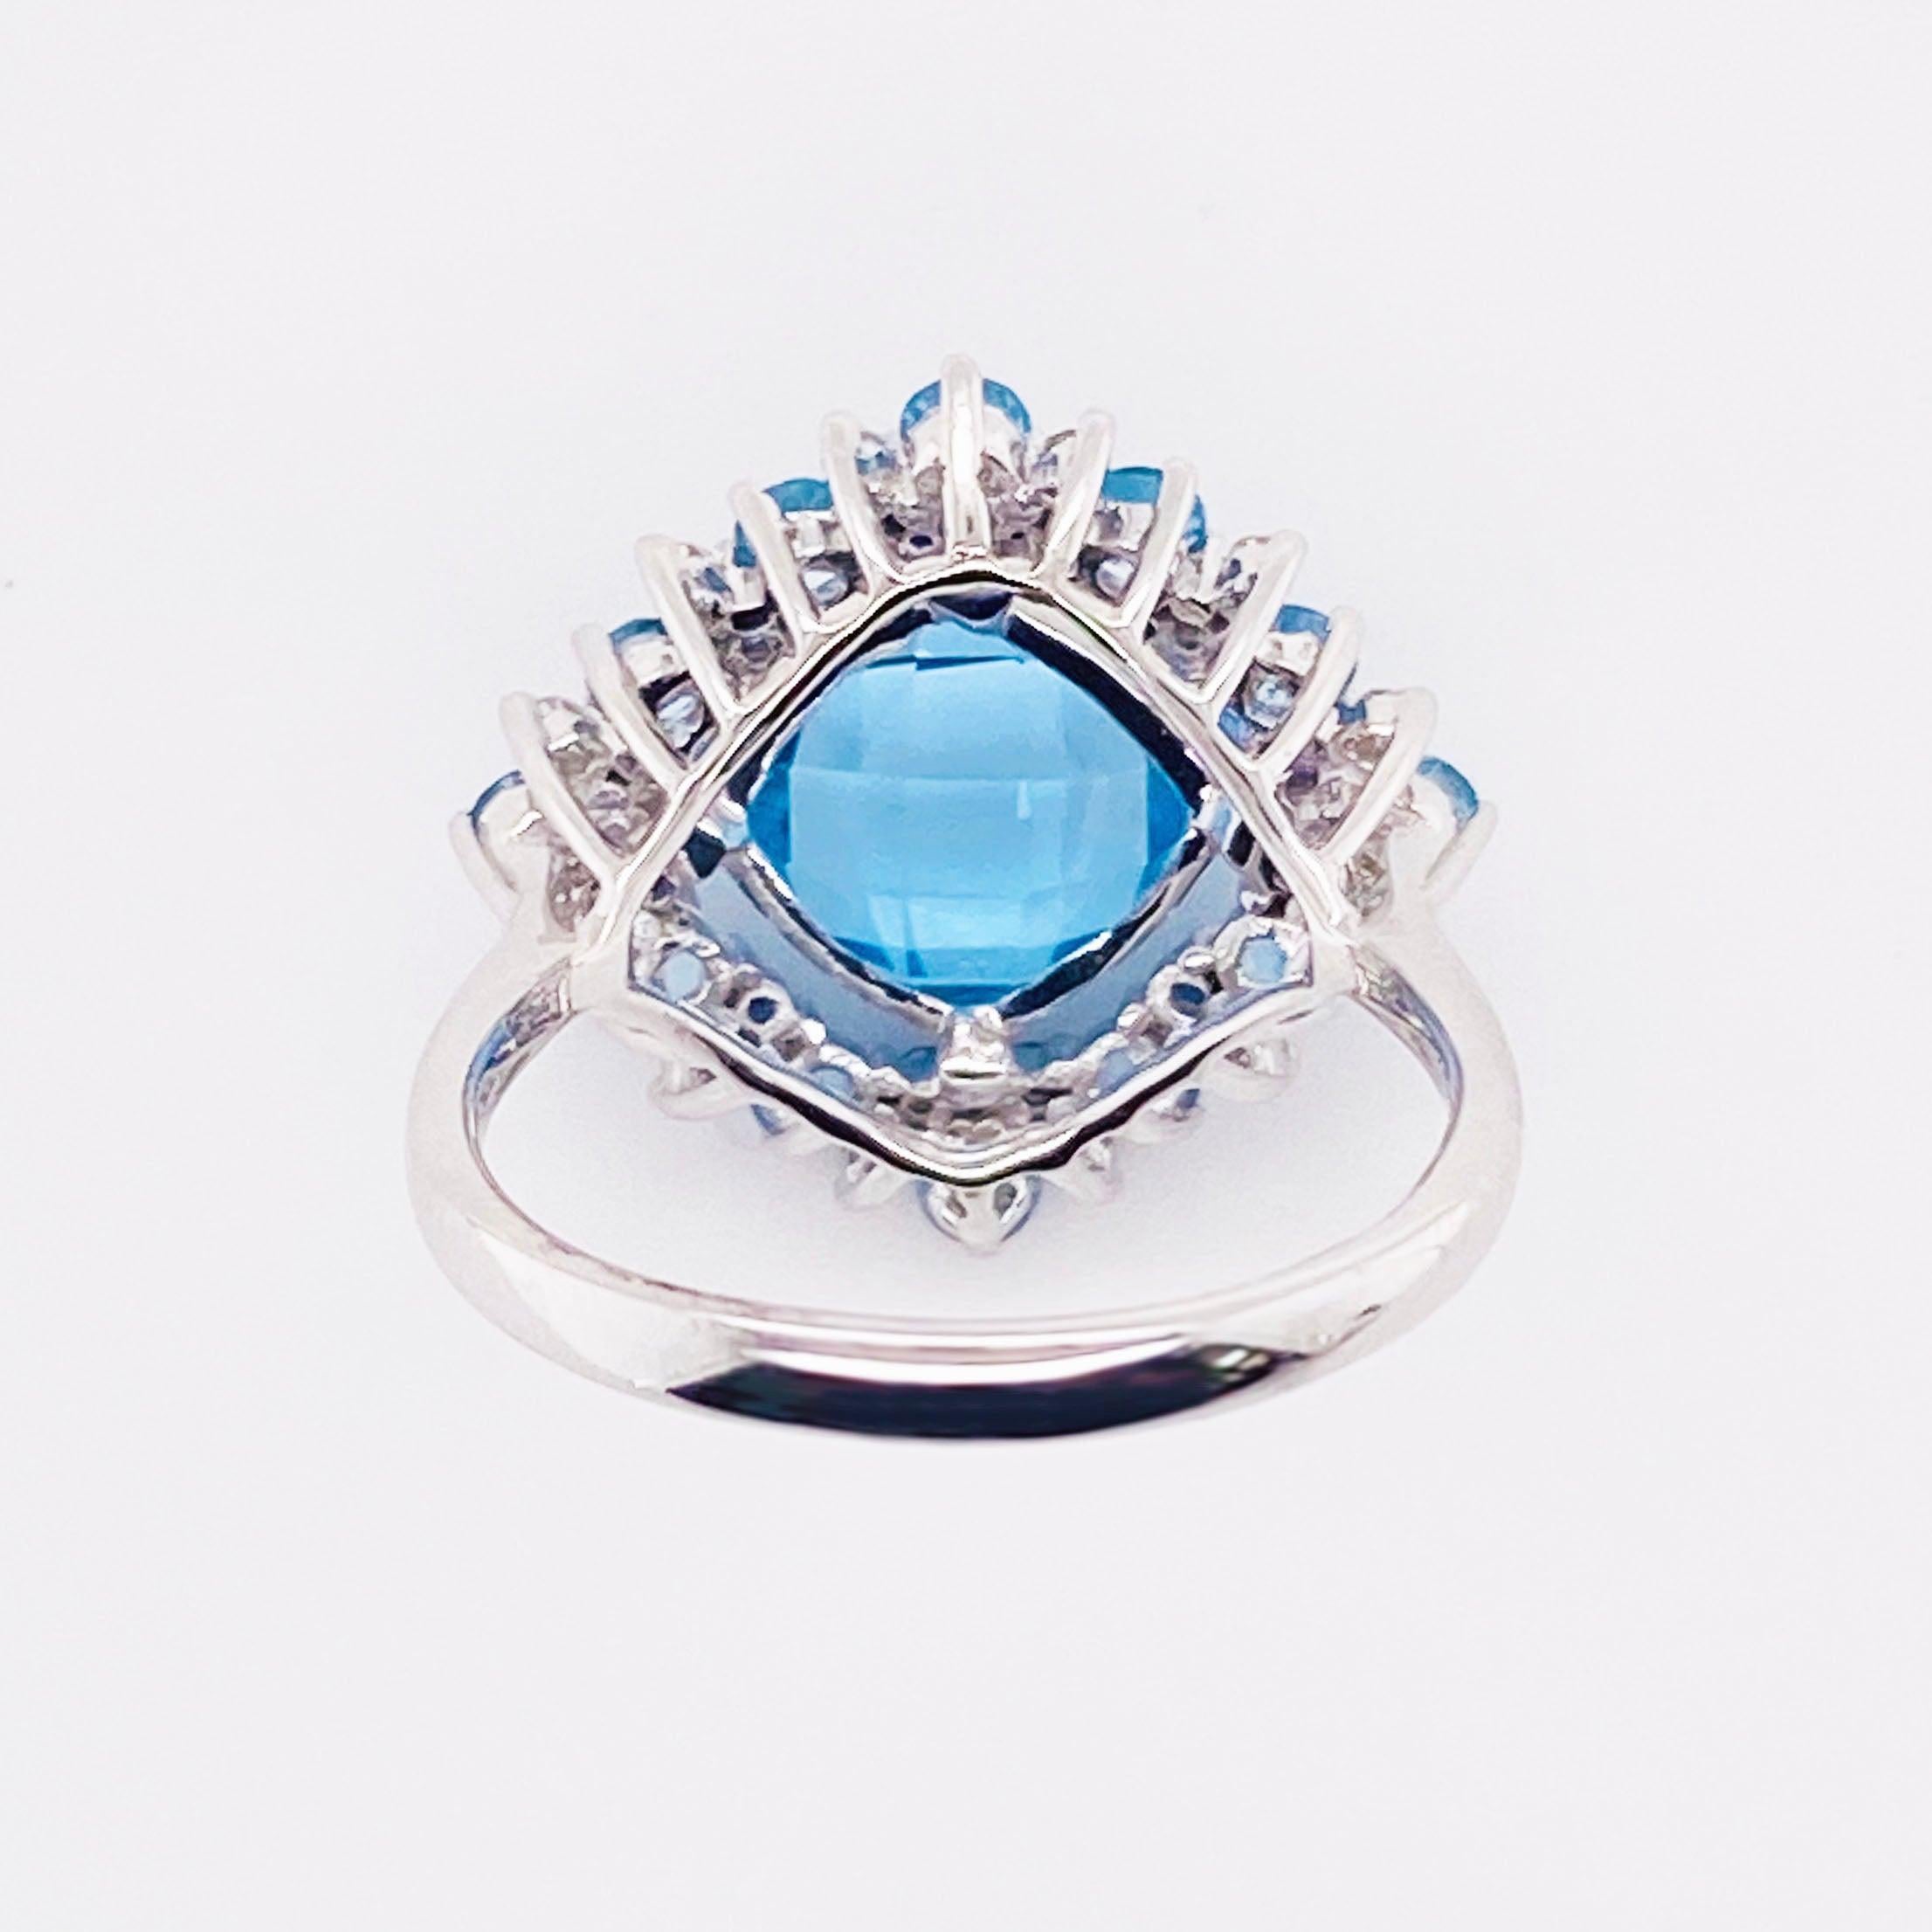 For Sale:  14k White Gold Blue Topaz, Sapphire and Diamond Ring 3